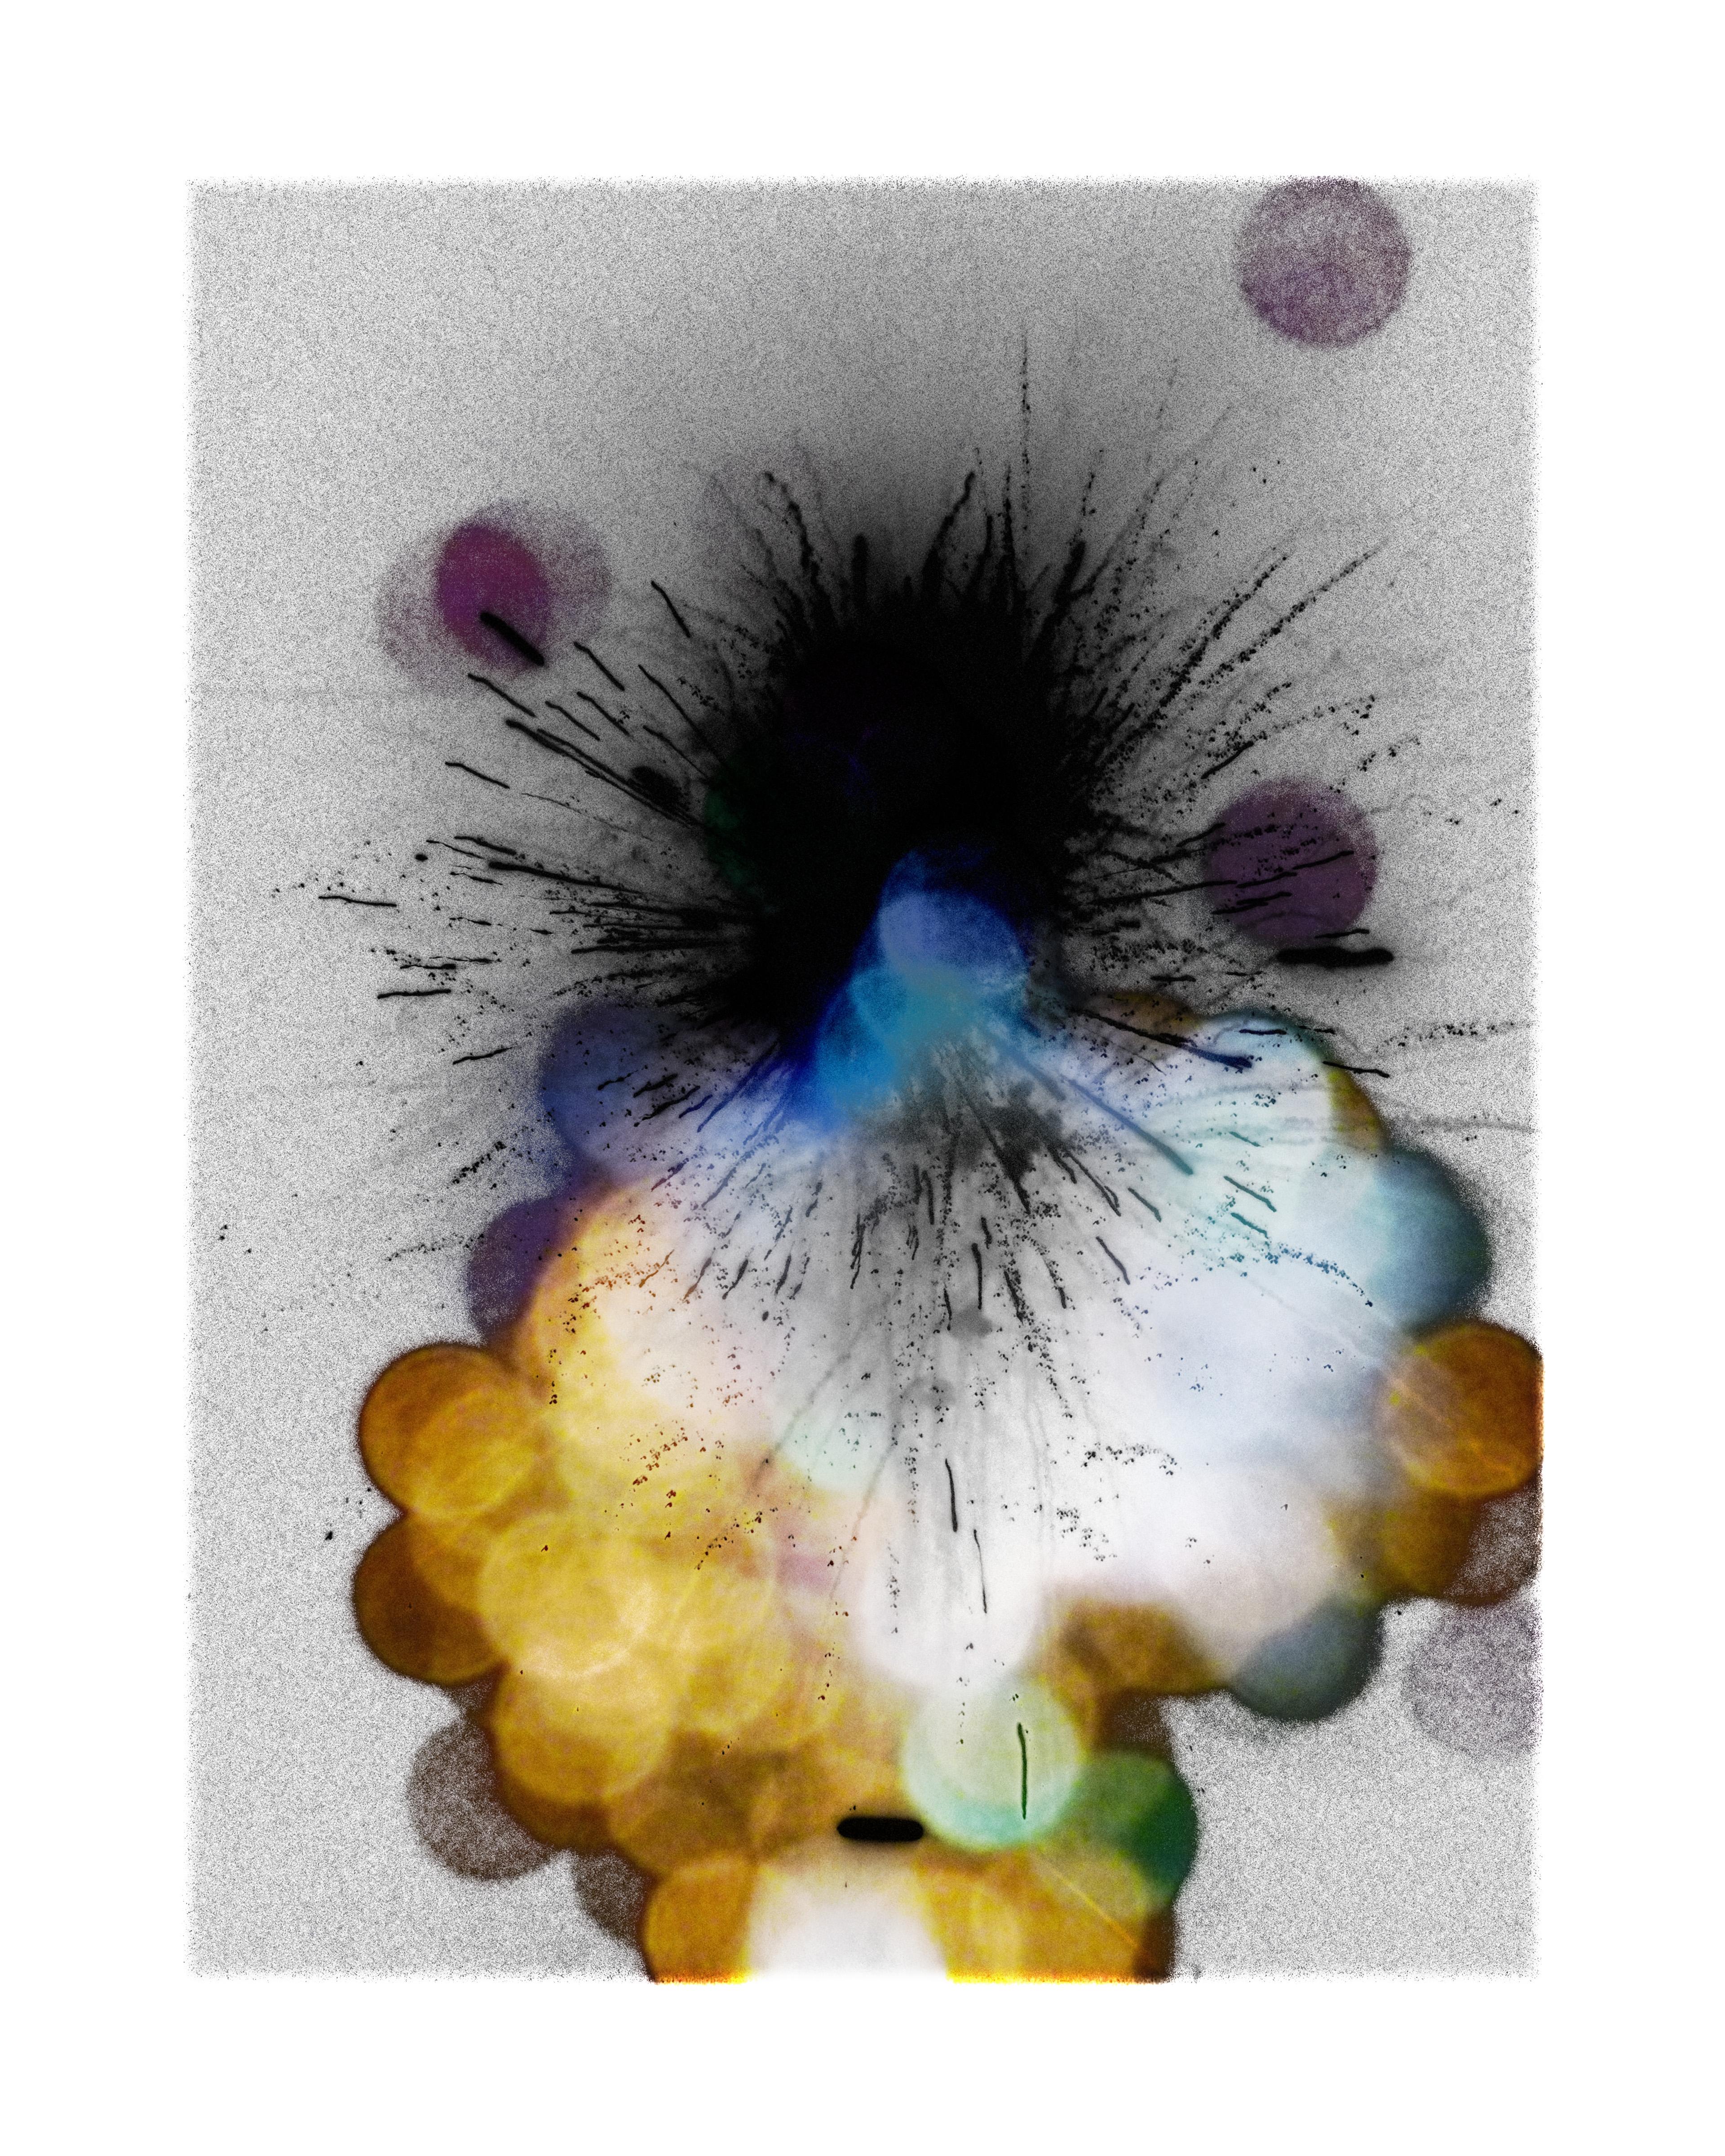 "Explosure, #21" by Tom & Lois White is available as a hand-signed and numbered archival pigment print on heavyweight cold press cotton rag paper in the following editions: 
40x52in; edition of 3
26x36in; edition of 12

*Custom framing options